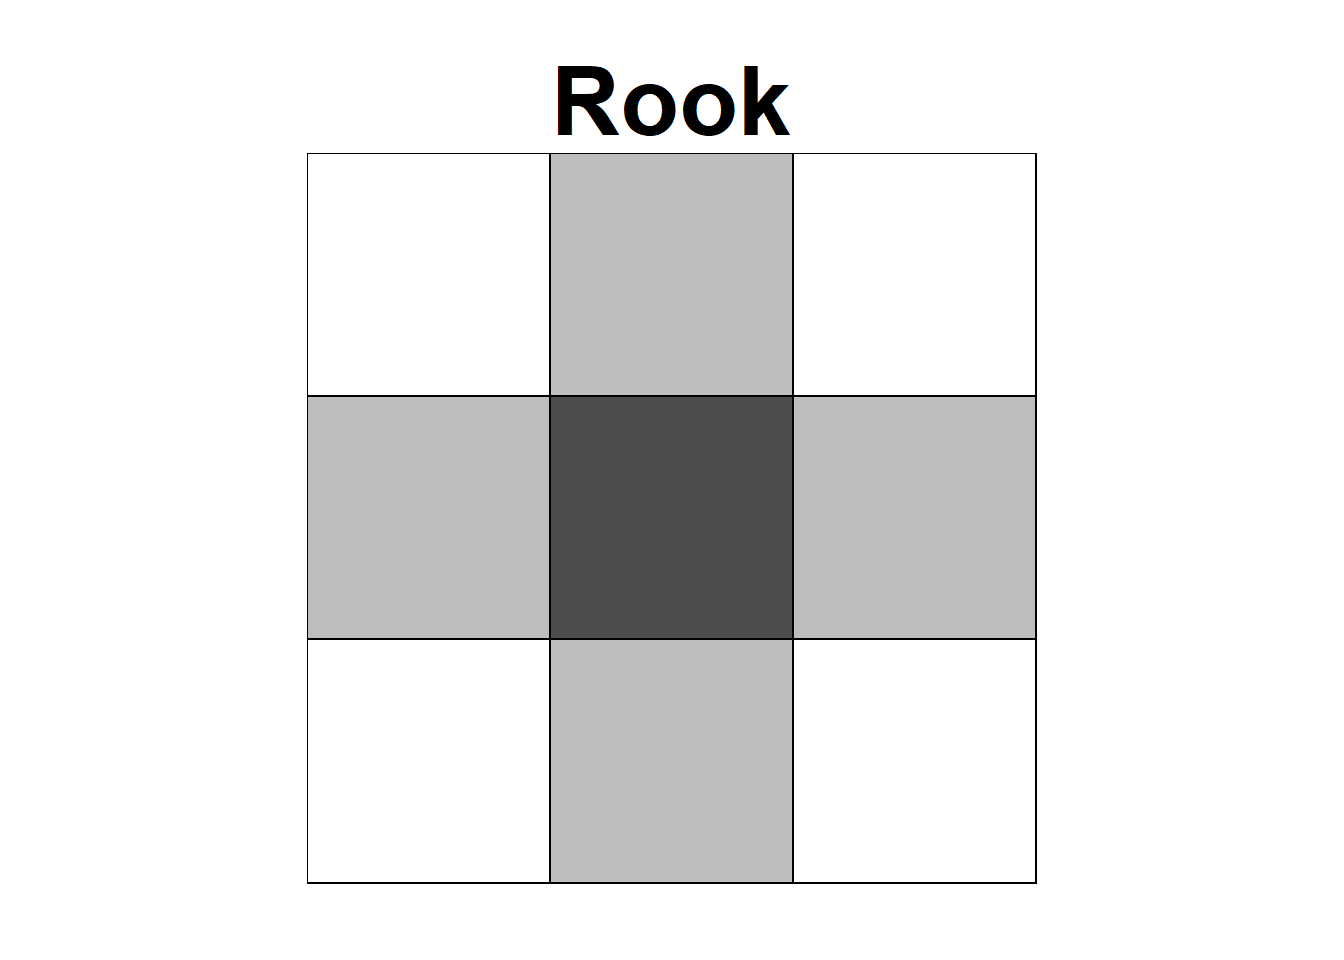 Neighbors based on contiguity. Area of interest is represented in black and its neighbors in gray.